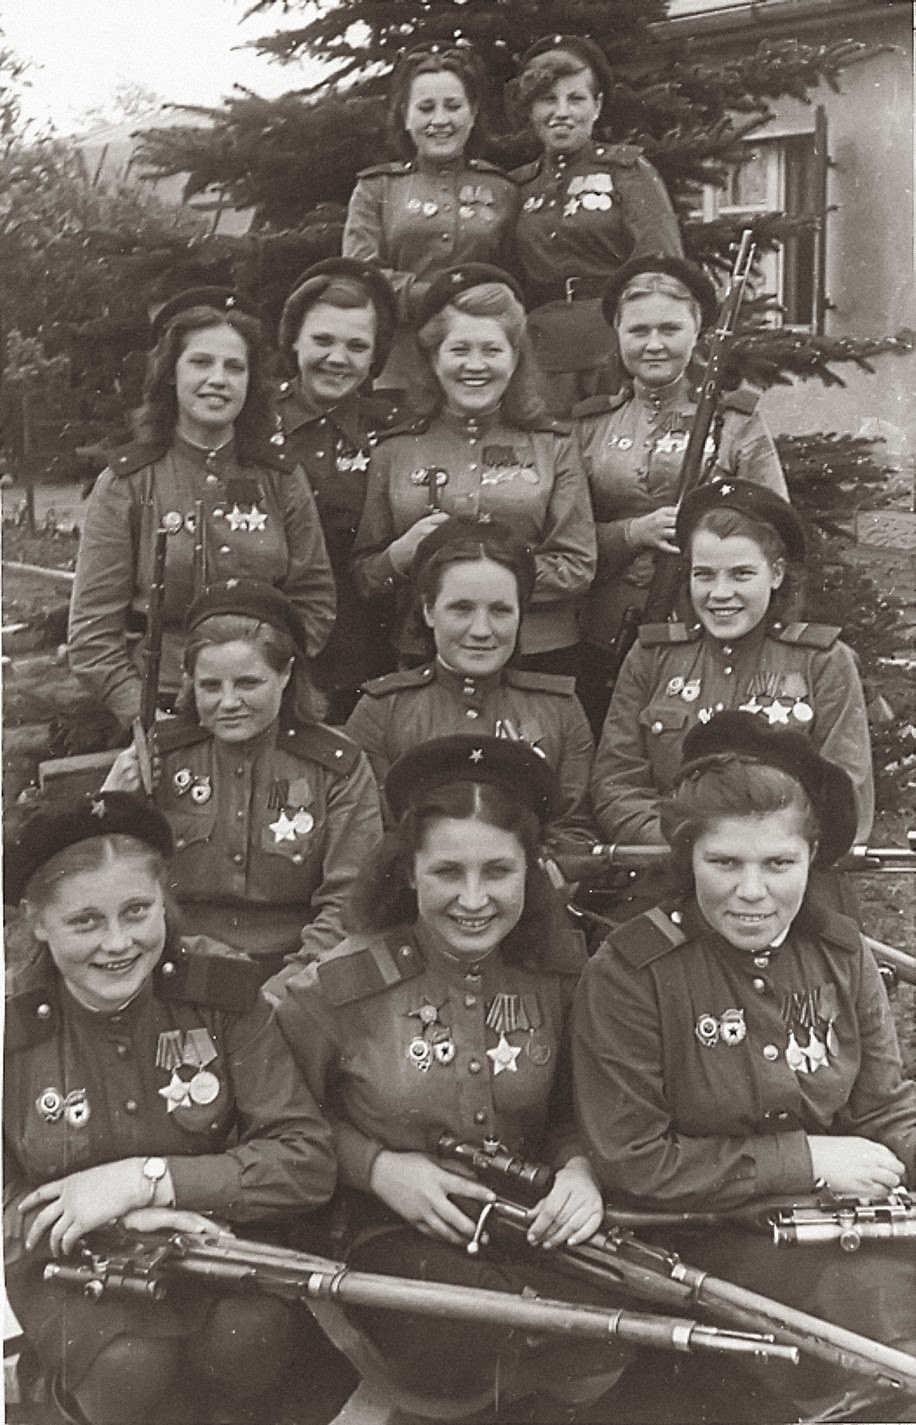 Female Snipers of the 3rd Shock Army, 1st Belorussian Front. Collectively, they had 775 confirmed kills.